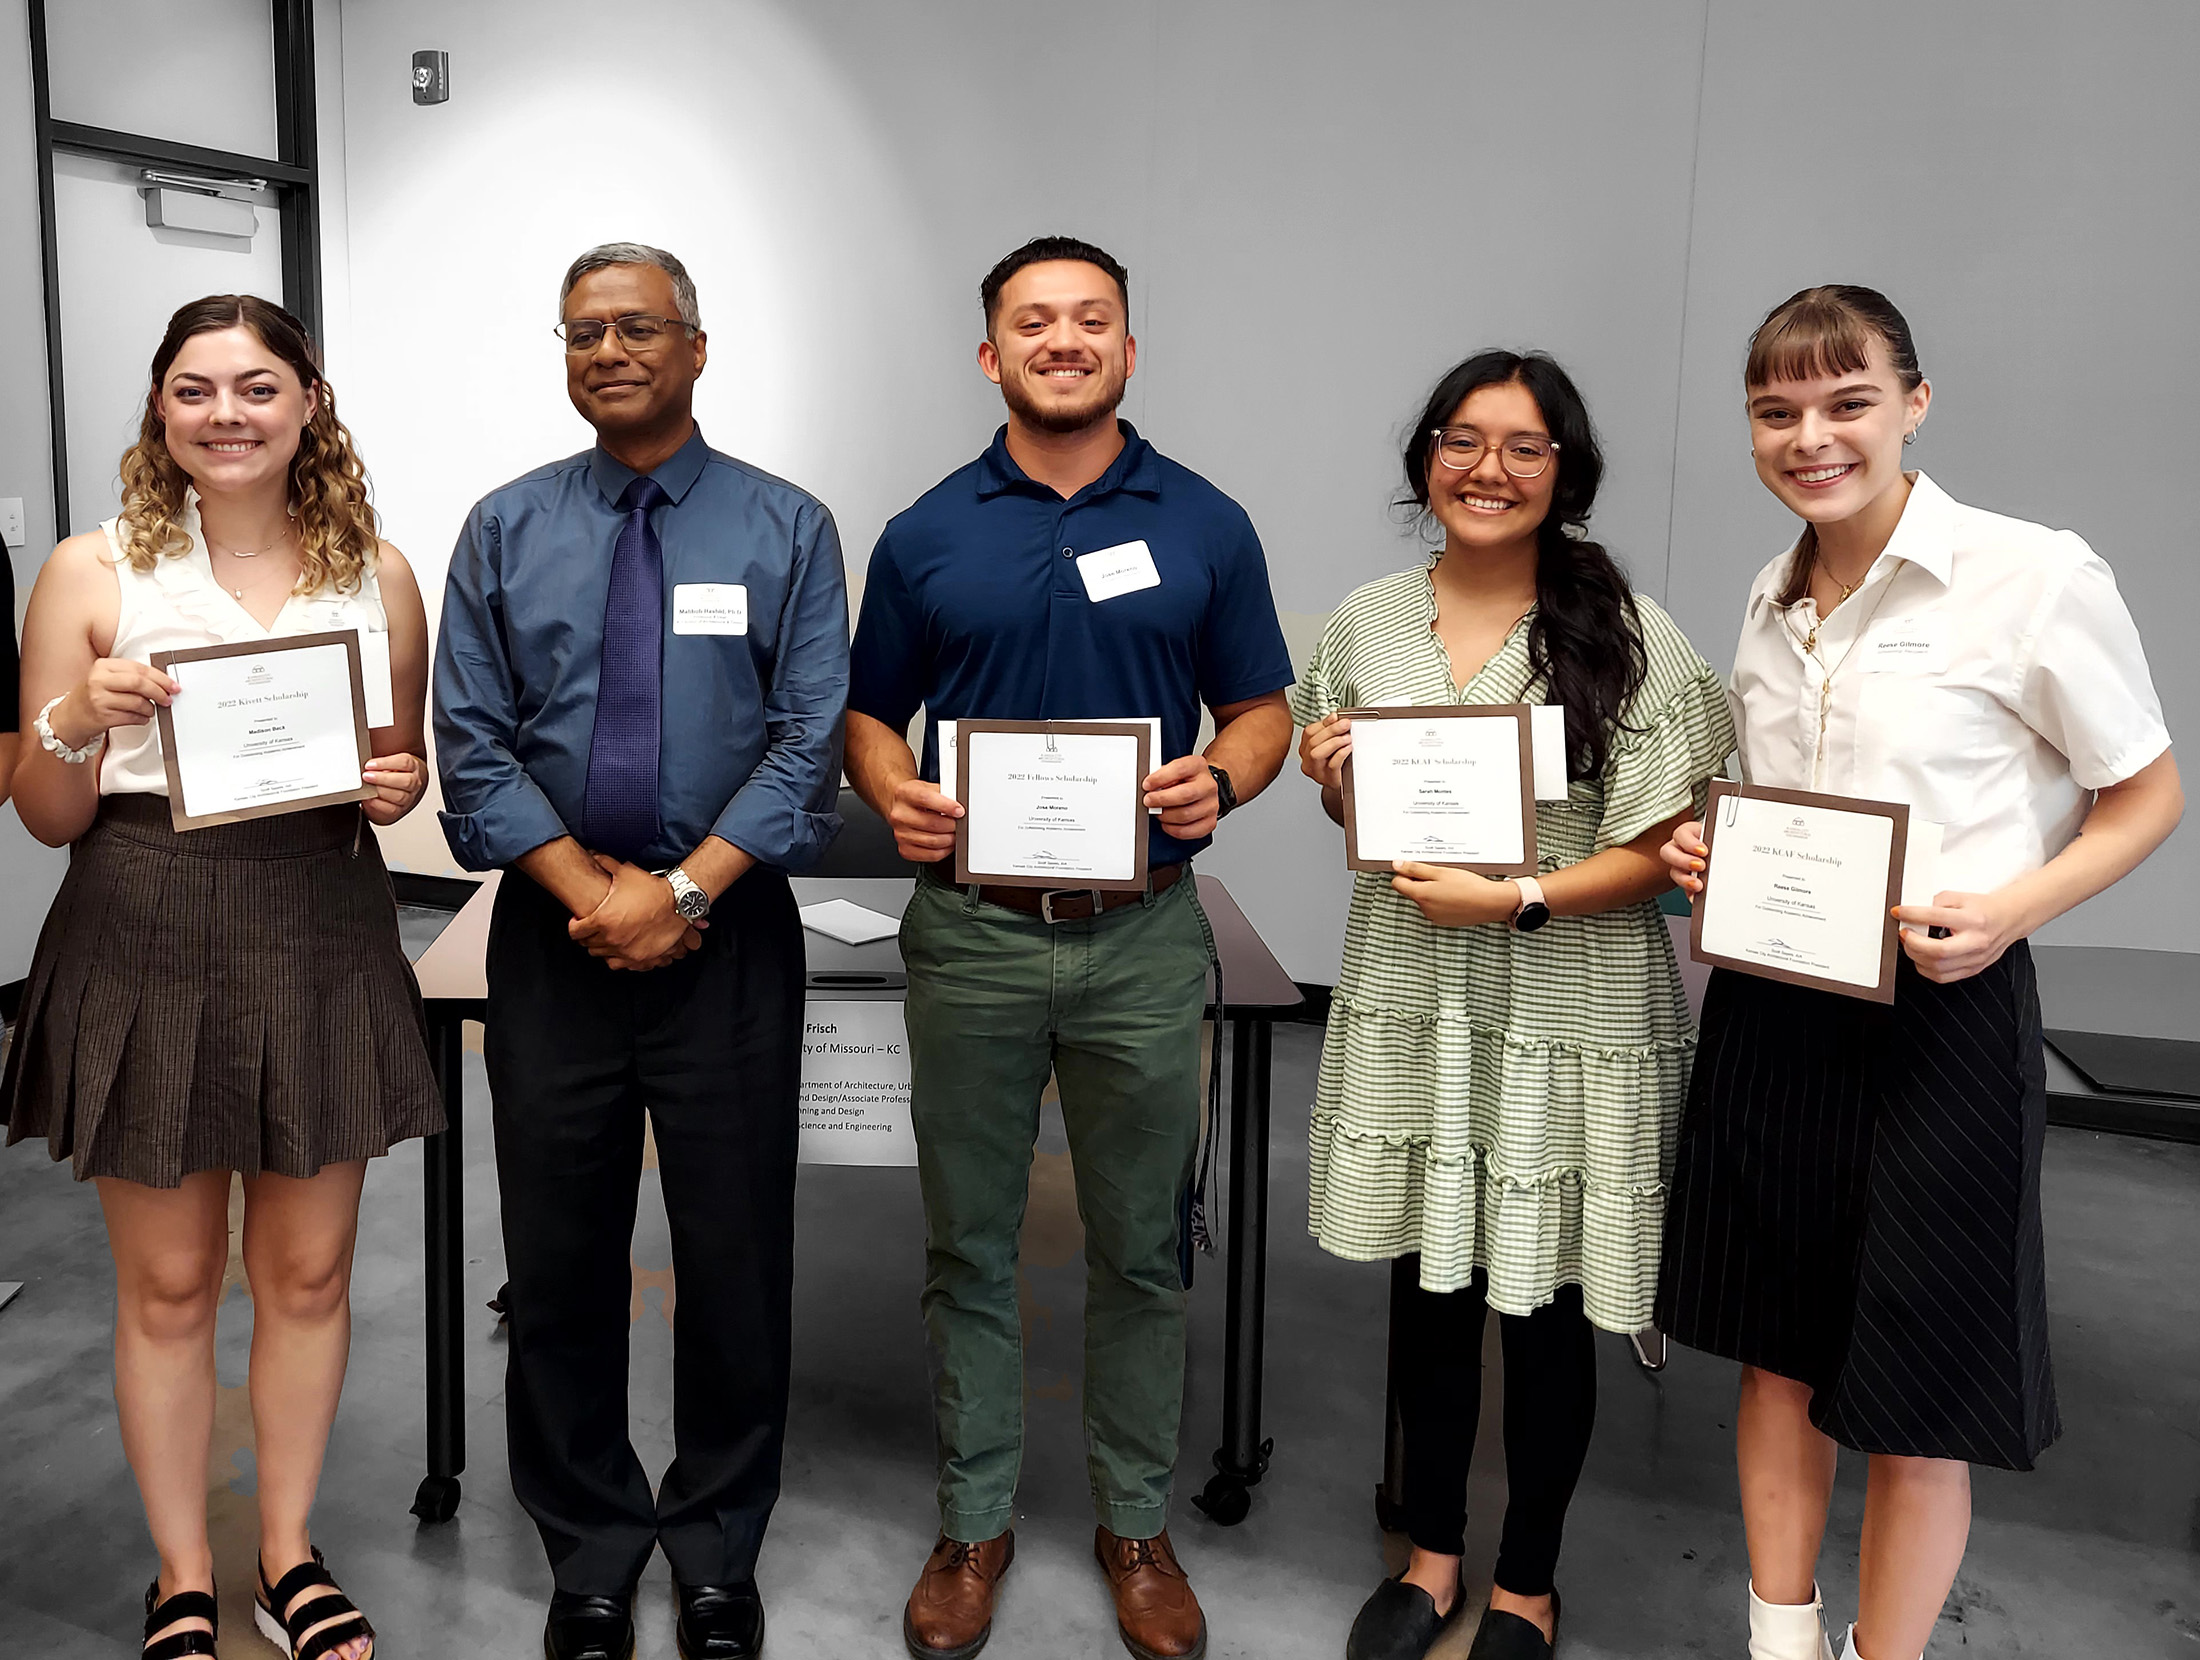  Pictured at Kansas City Architectural Foundation awards ceremony: Madison Beck; Mahbub Rashid, dean of the KU School of Architecture & Design; Jose Moreno; Sarah Montes and Reese Gilmore.